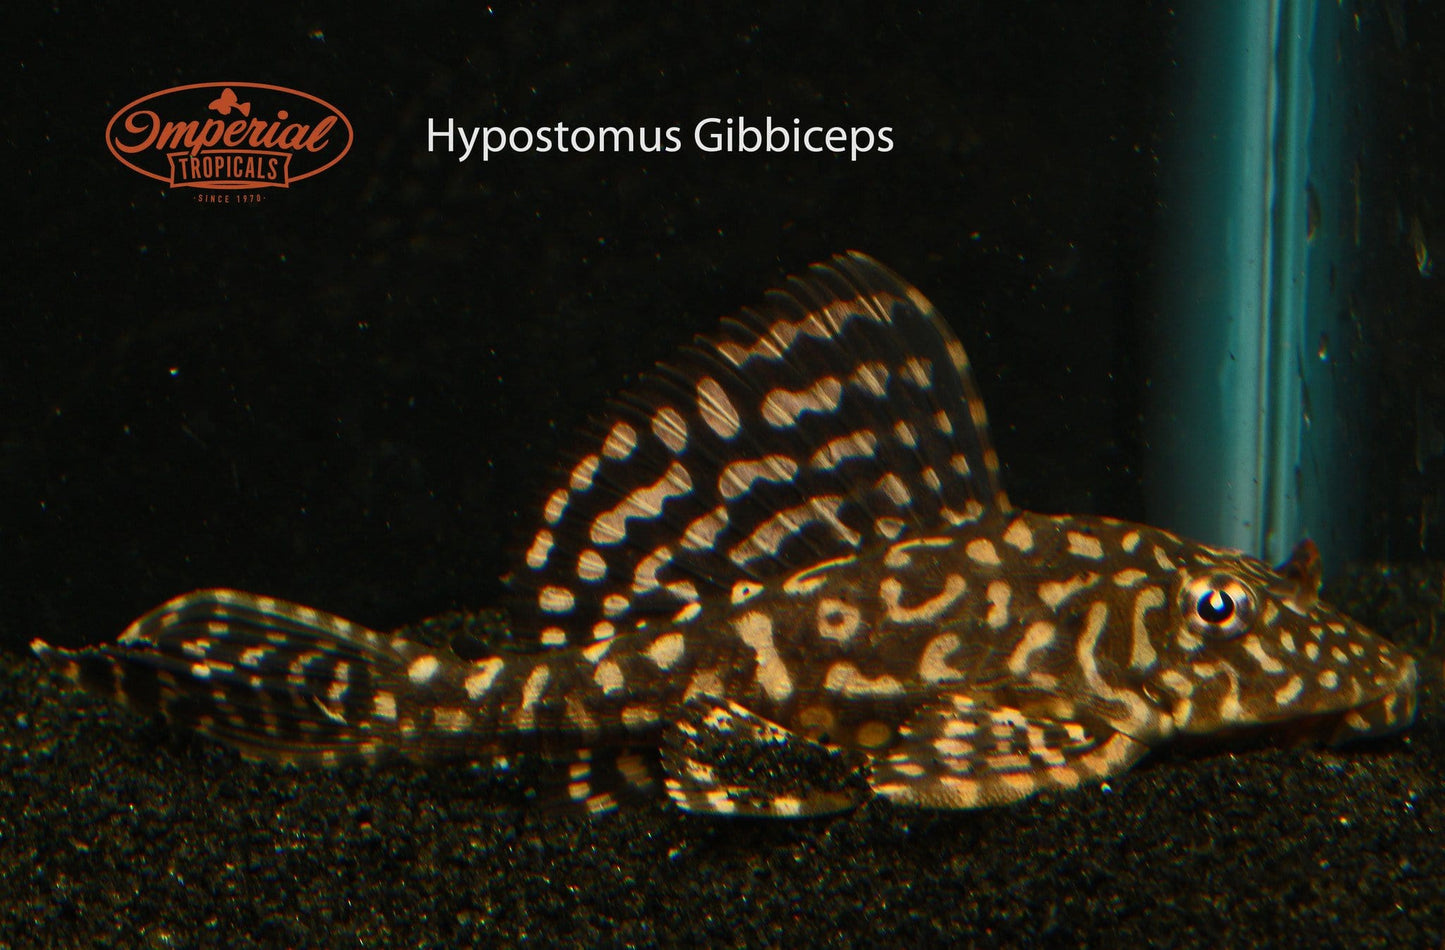 Spotted Sailfin Pleco (Pterygoplichthys joselimaianus) - Imperial Tropicals